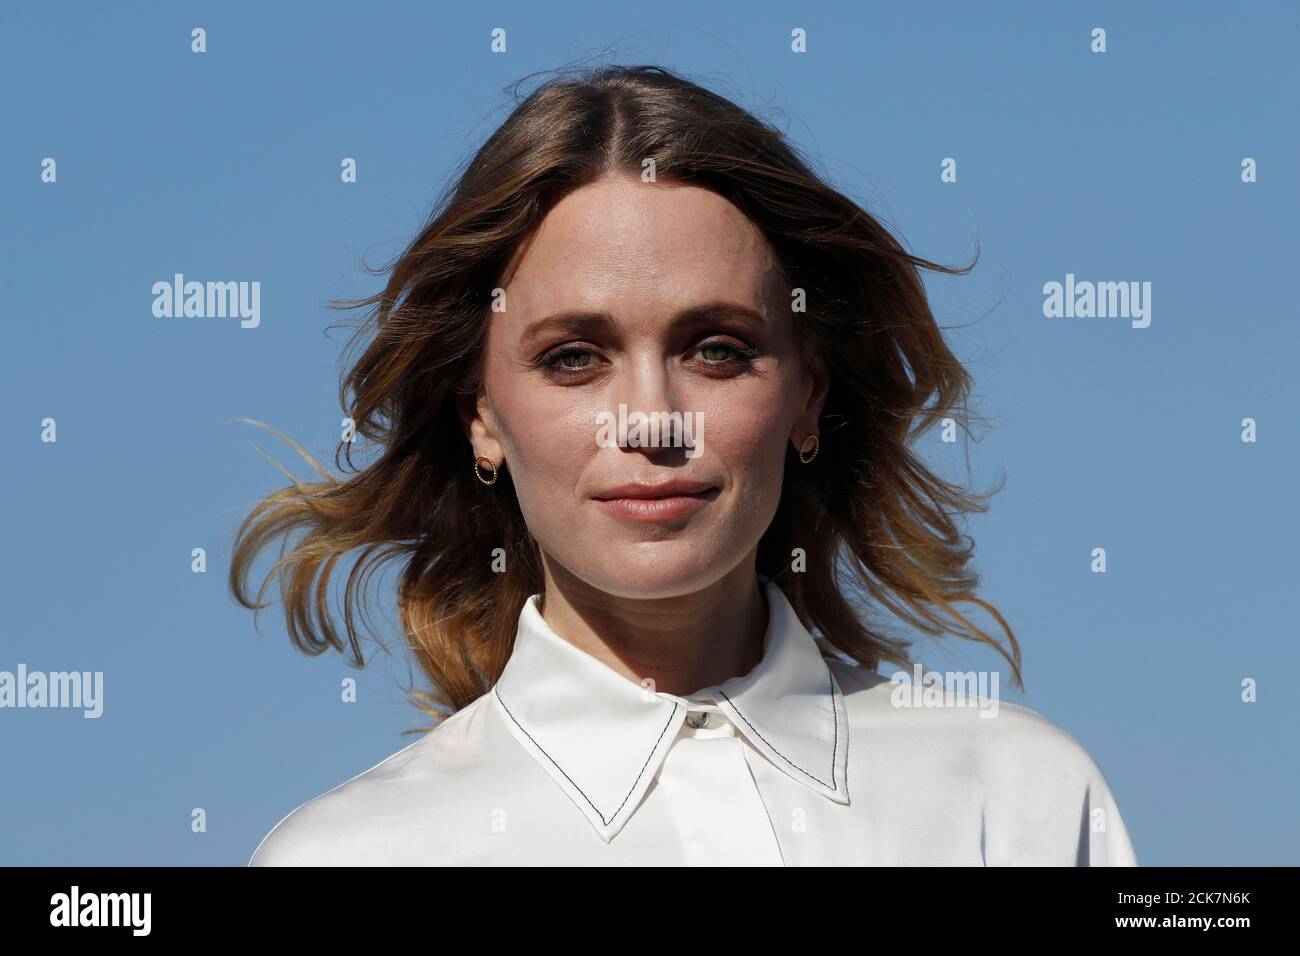 Katia winter High Resolution Stock Photography and Images - Alamy